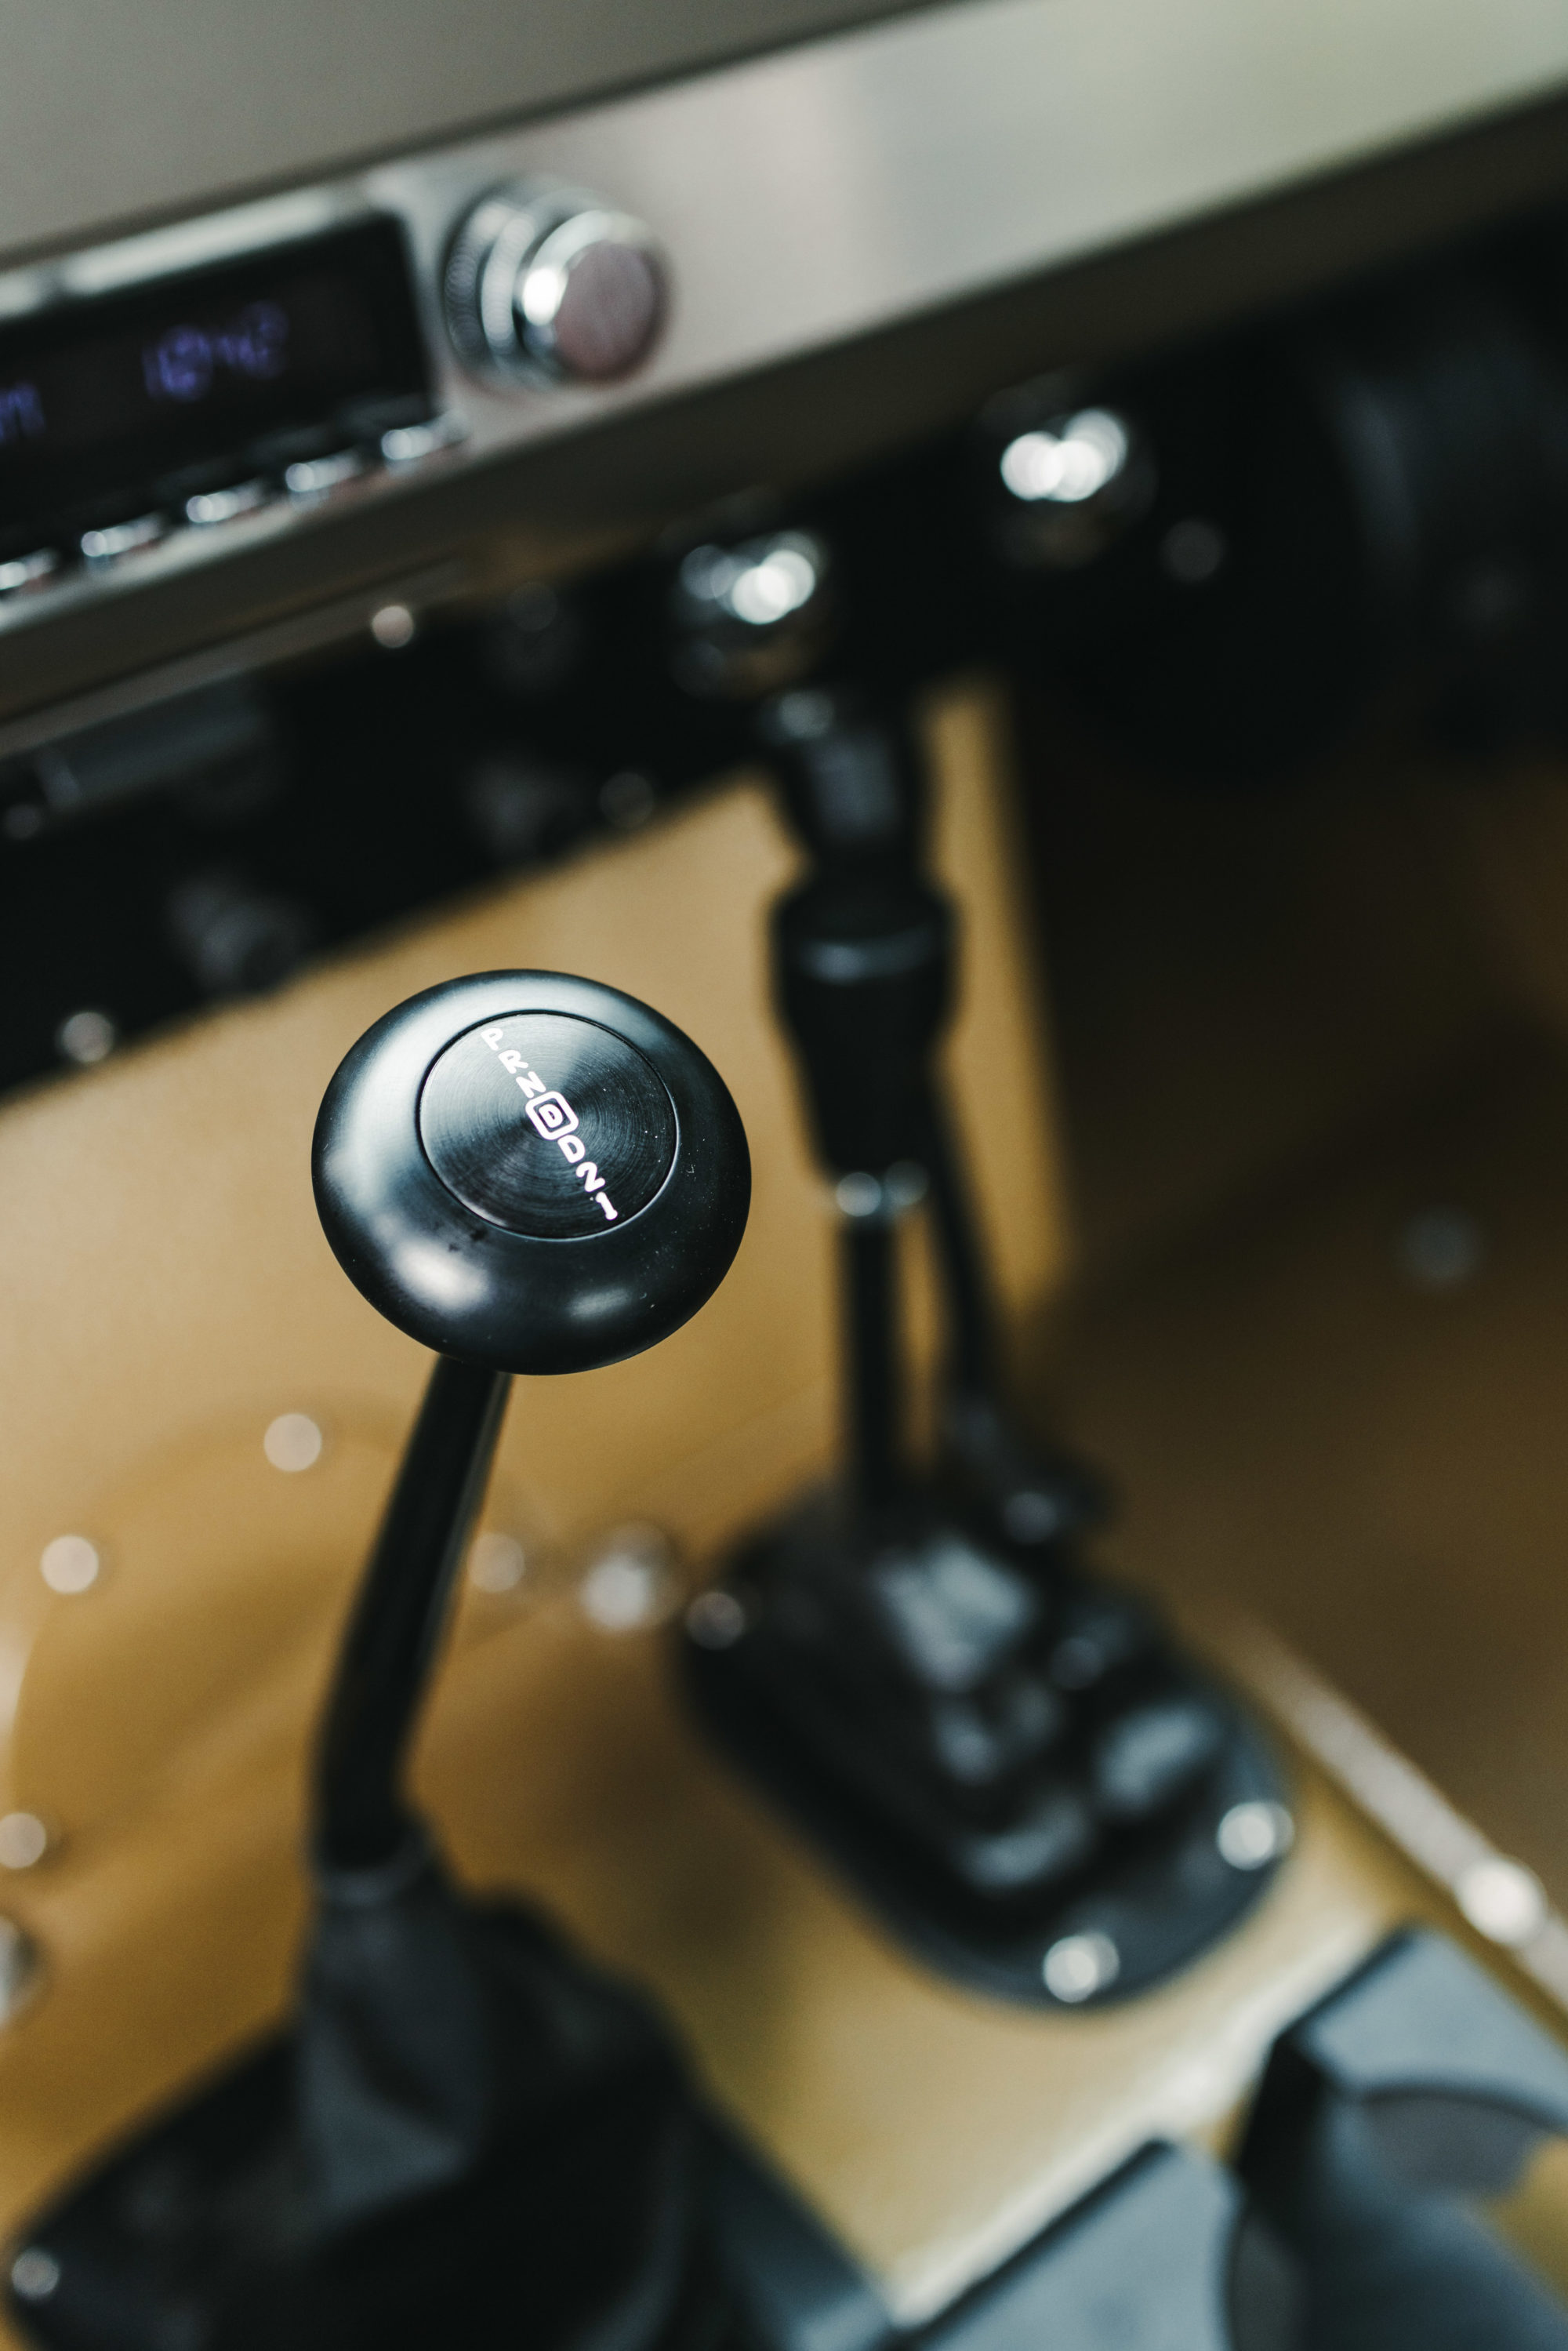 Scout 800 shifter